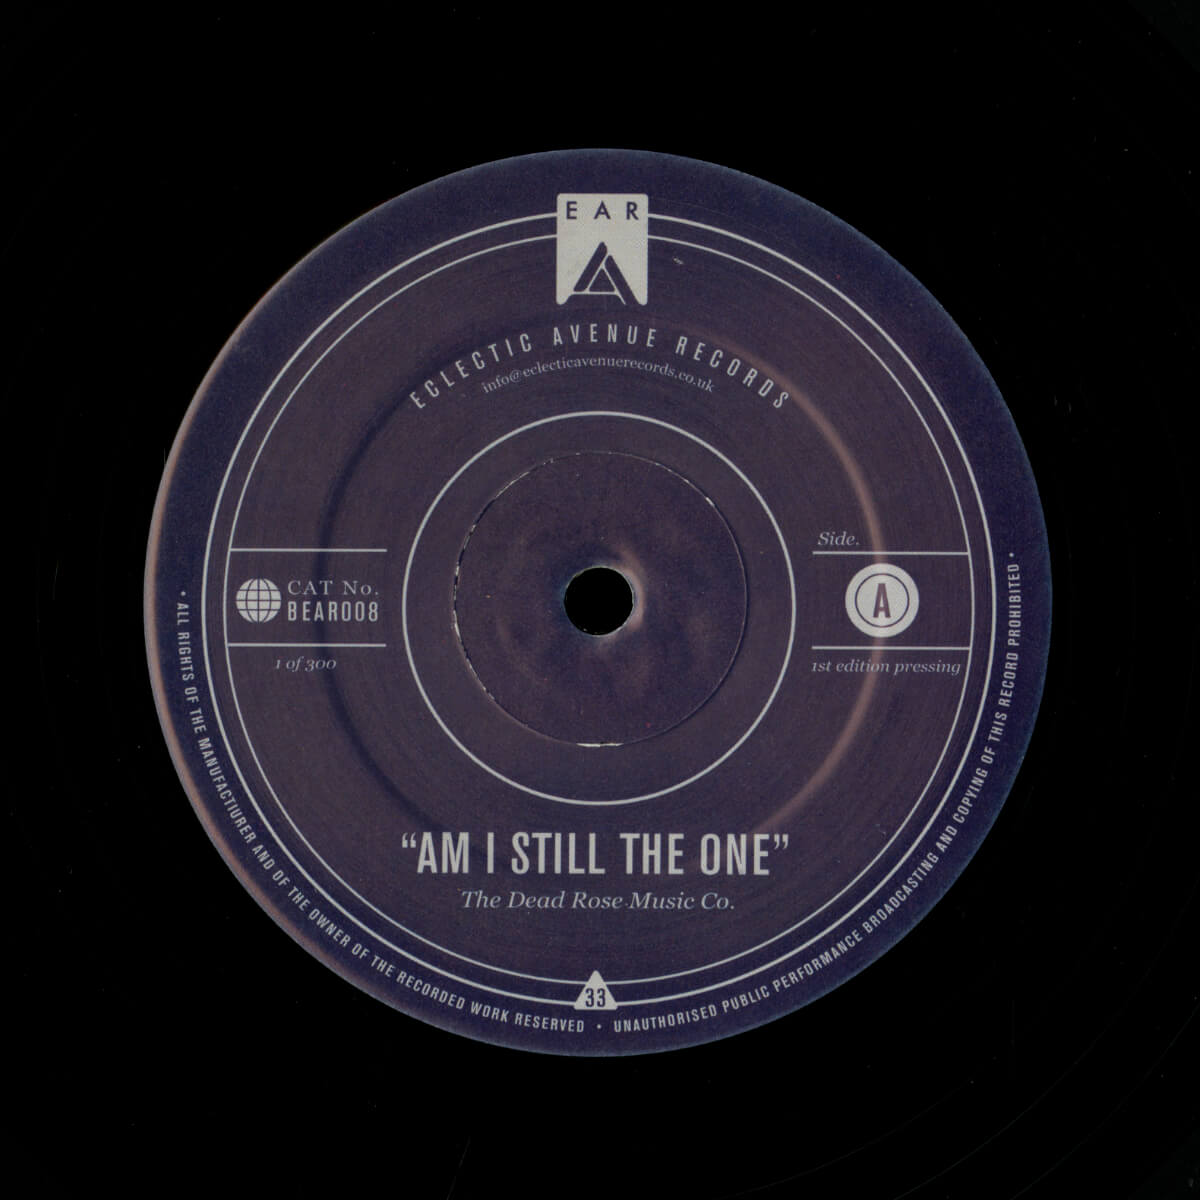 The Dead Rose Music Co – Am I Still The One